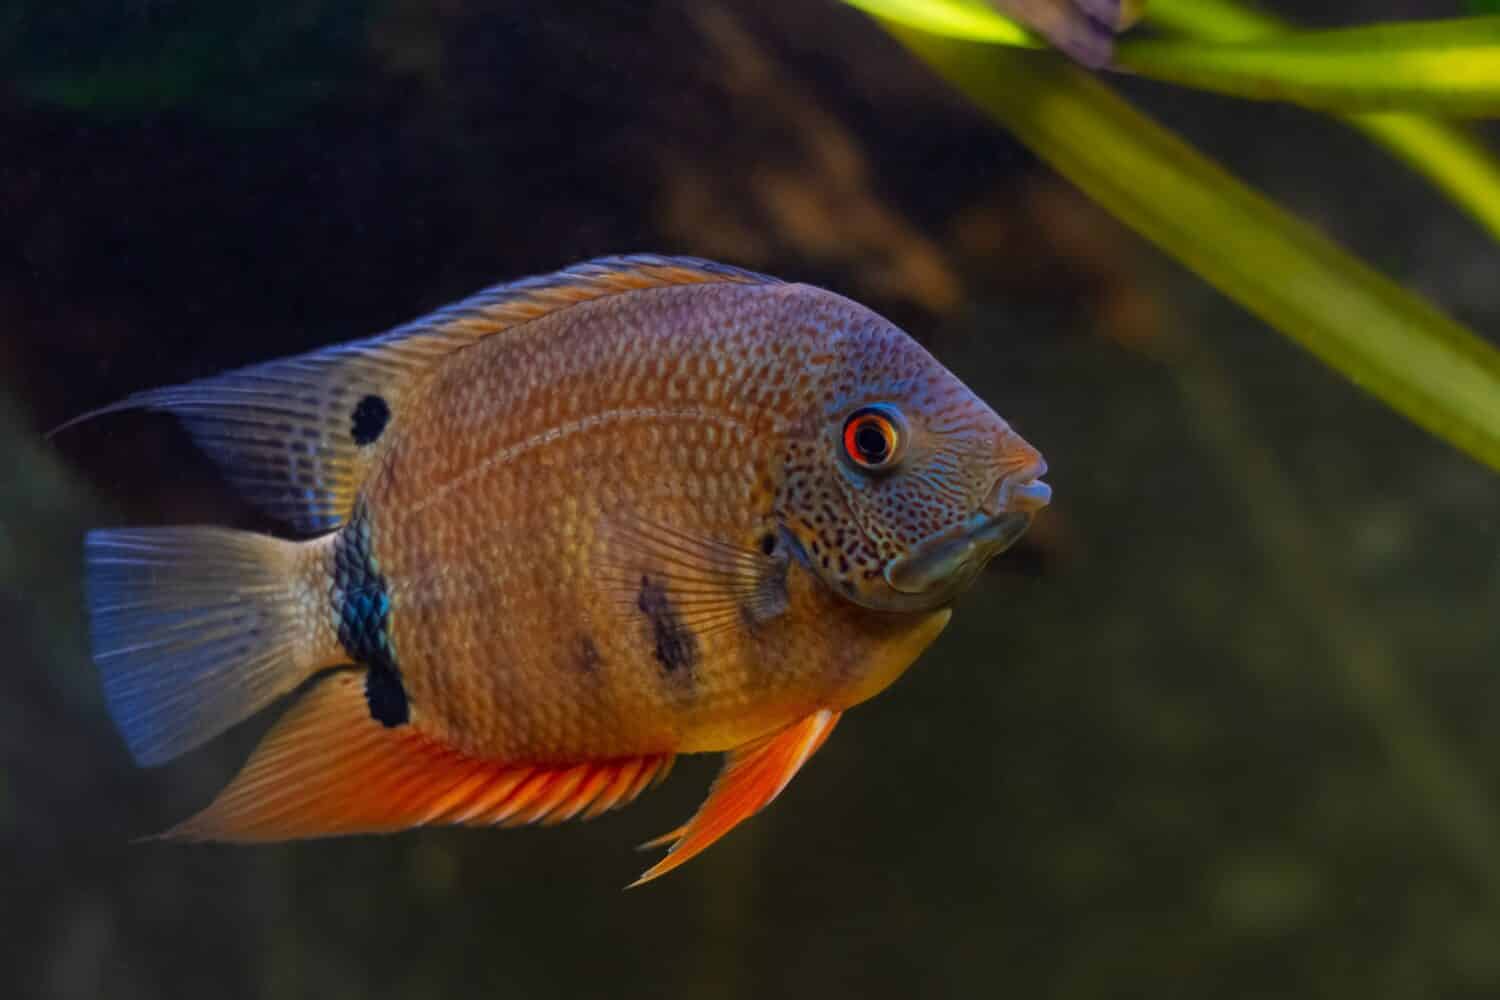 curious and sociable adult severum cichlid, easy to keep, hardy freshwater fish from Amazon river basin in low light fish aquarium, popular pet for beginners